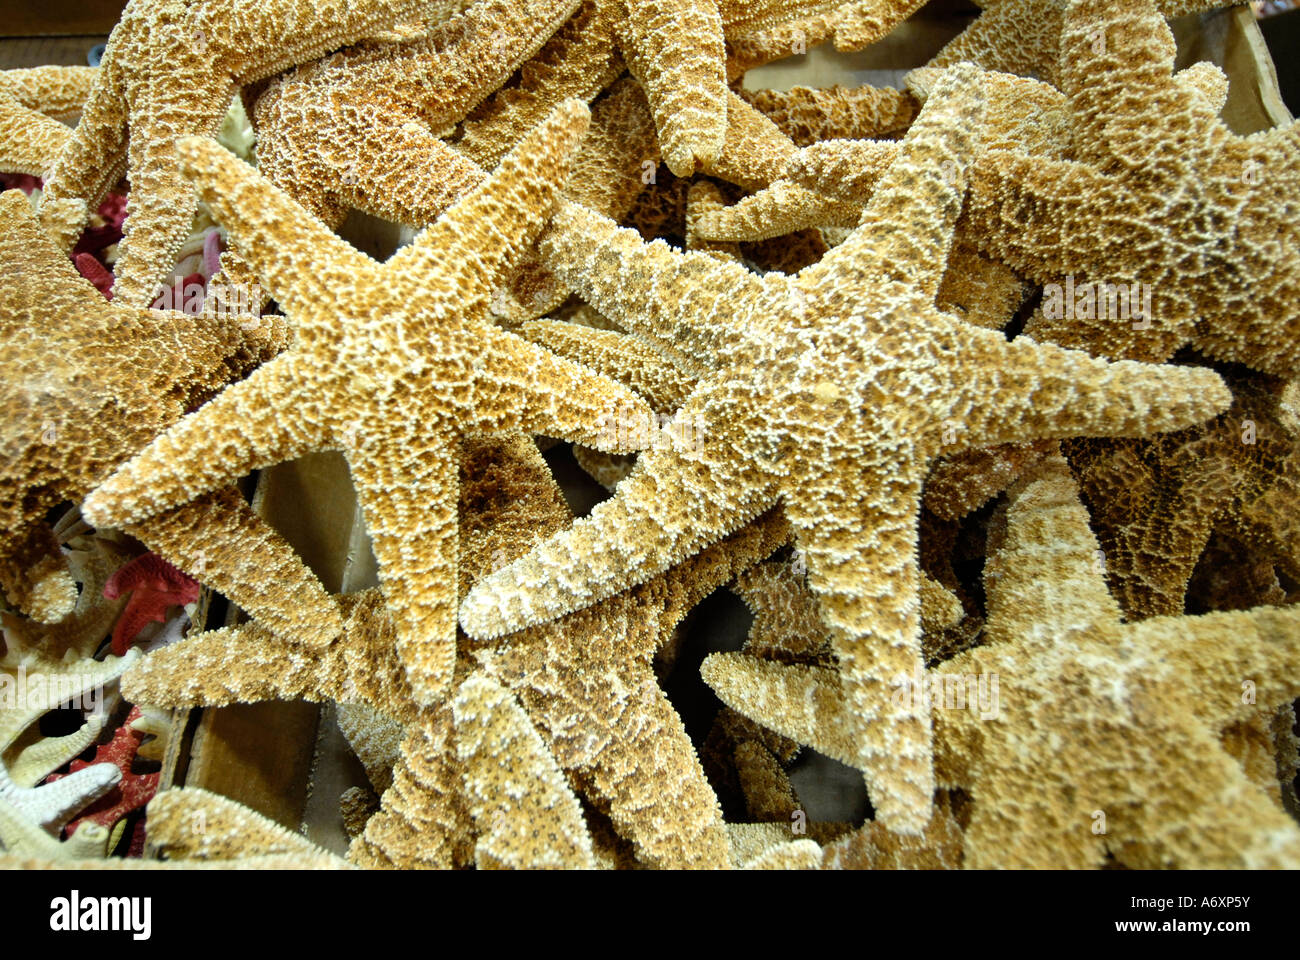 Starfish on display at the Worlds largest Shell Factory a popular tourist attraction in North Fort FT Myers Florida FL Stock Photo